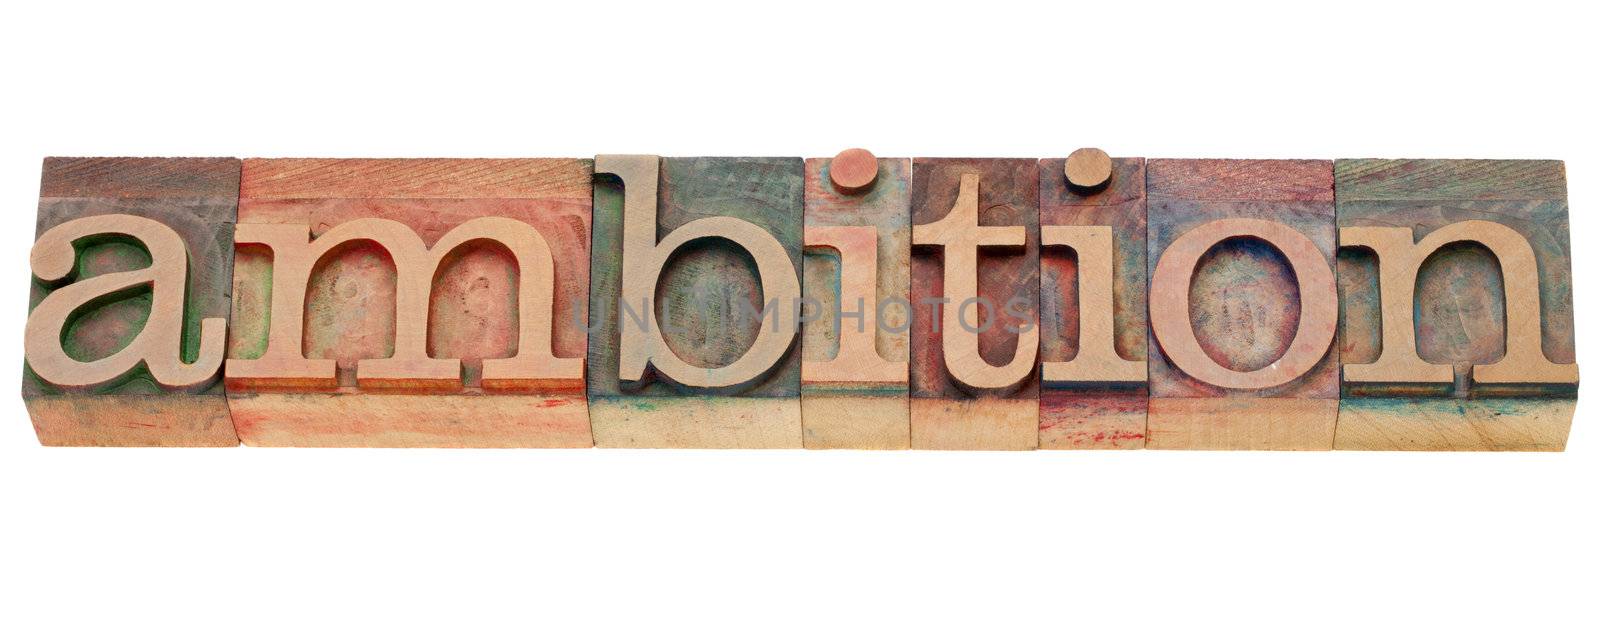 ambition - isolated word in vintage wood letterpress printing blocks